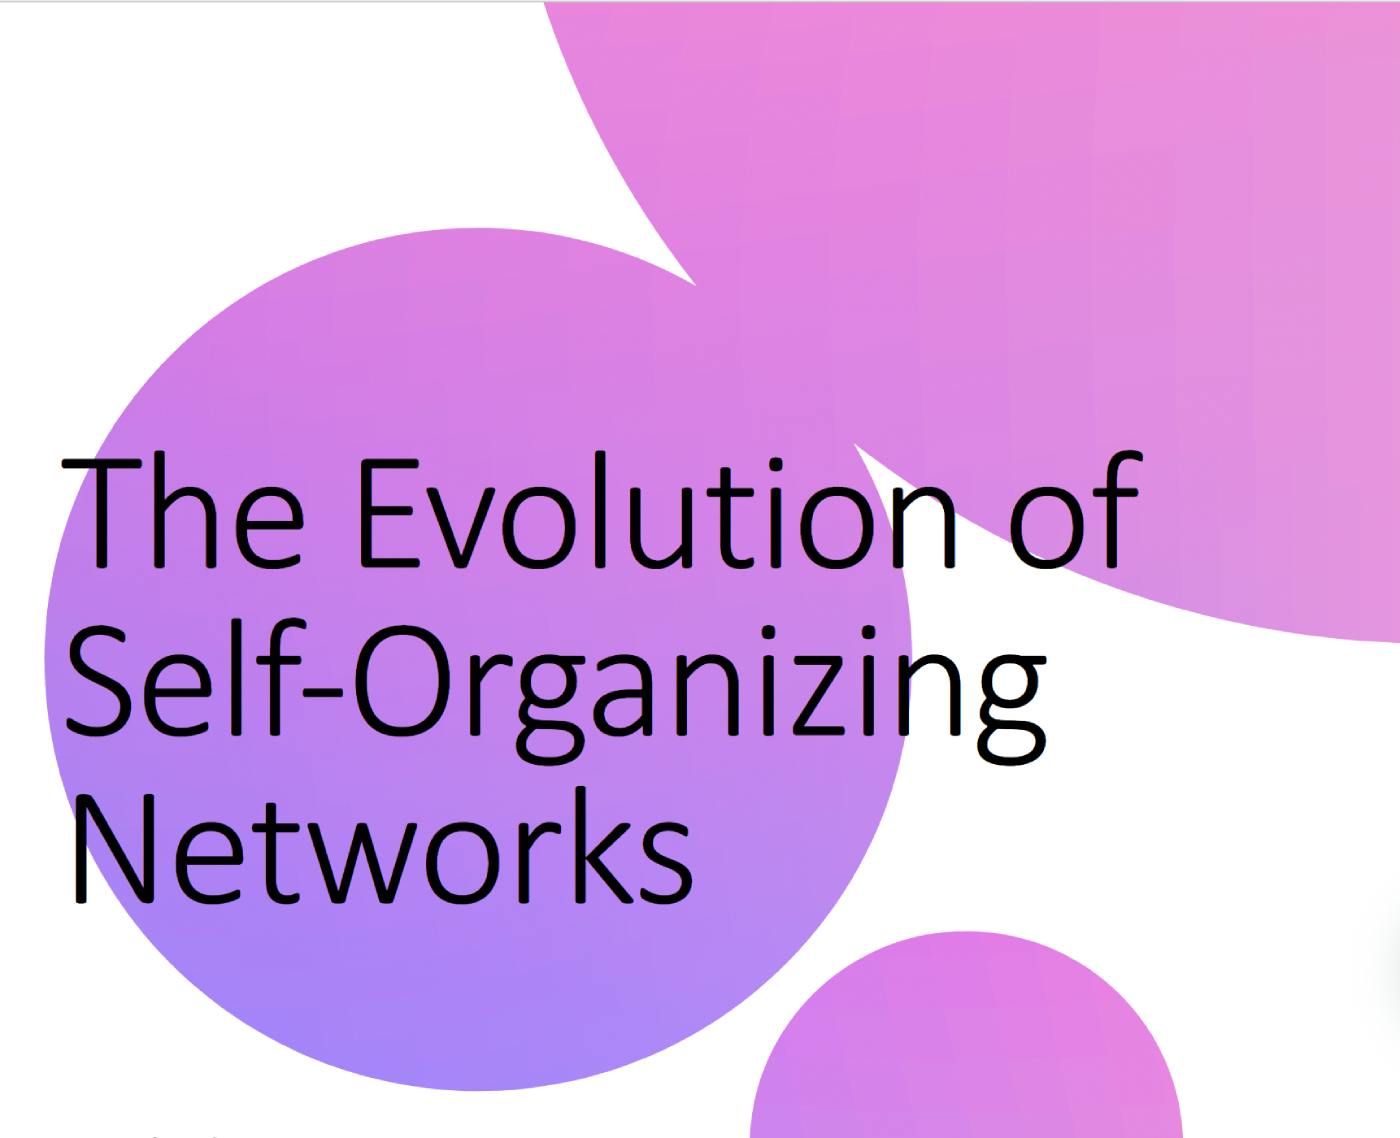 The Evolution of Self-Organizing Networks